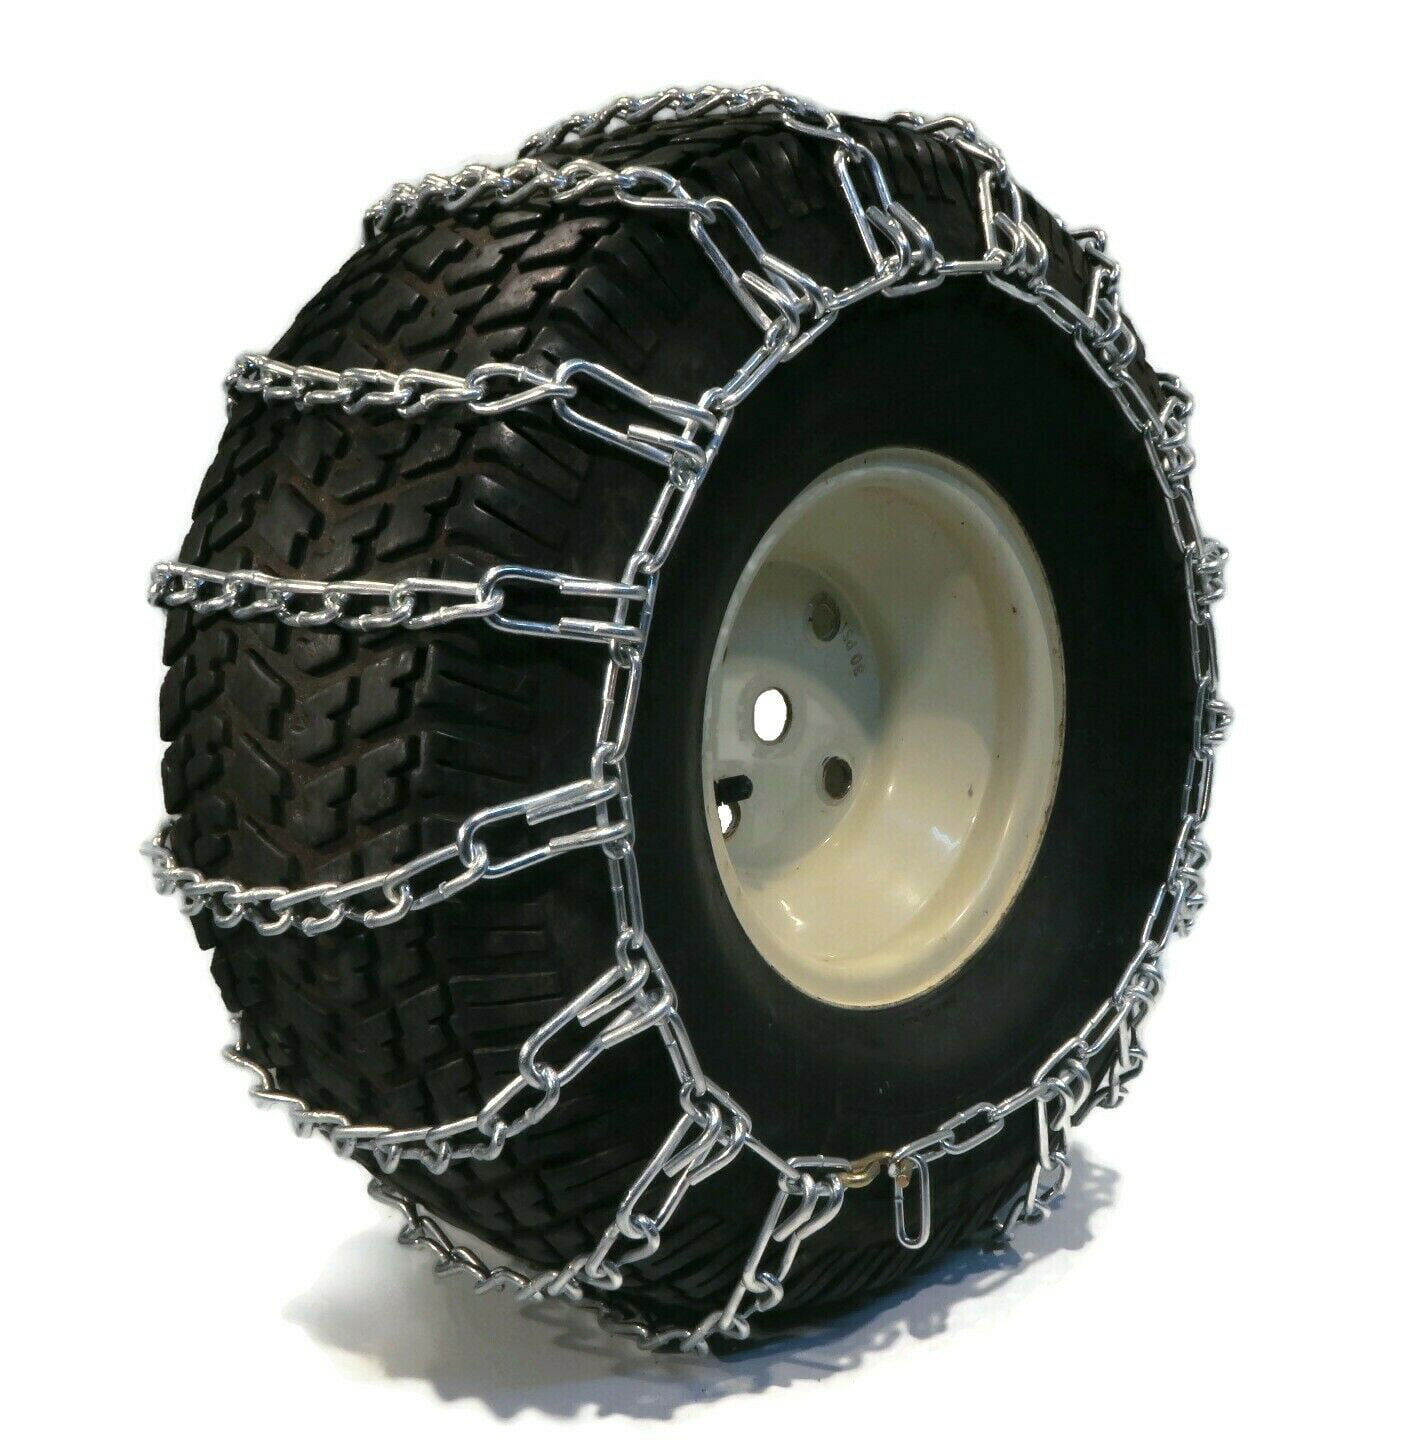 New PAIR 2 Link TIRE CHAINS 23x10.5x12 fits many Can-Am Commander Defender UTV 